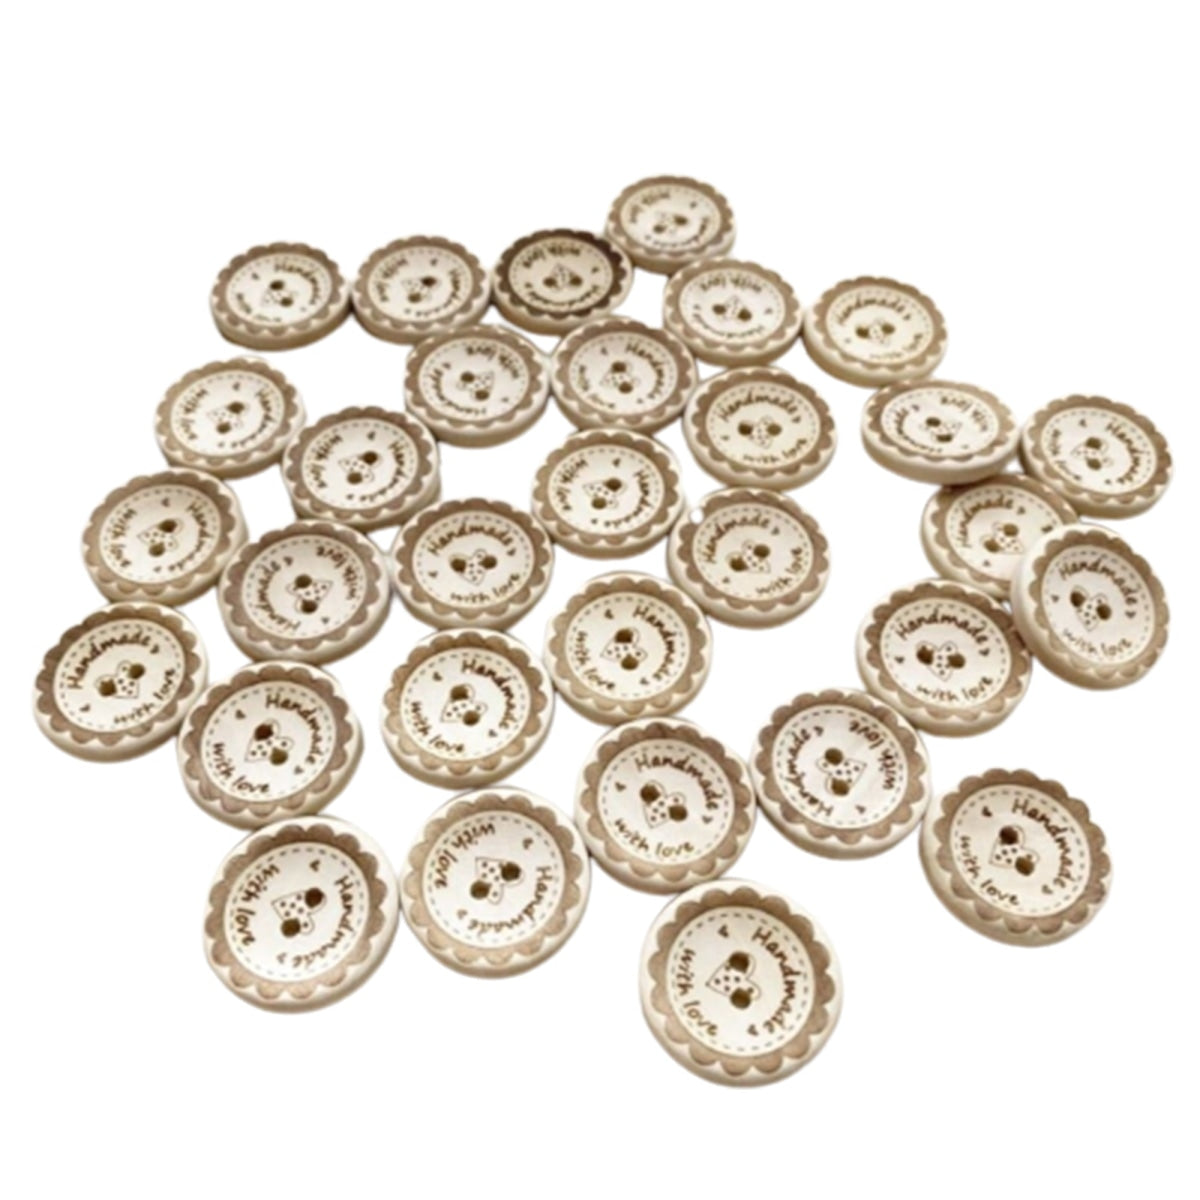 40-100Pcs 20-30Mm Wooden Buttons Handmade With Love Round Clothes Button 20Mm 100Pcs Clothing